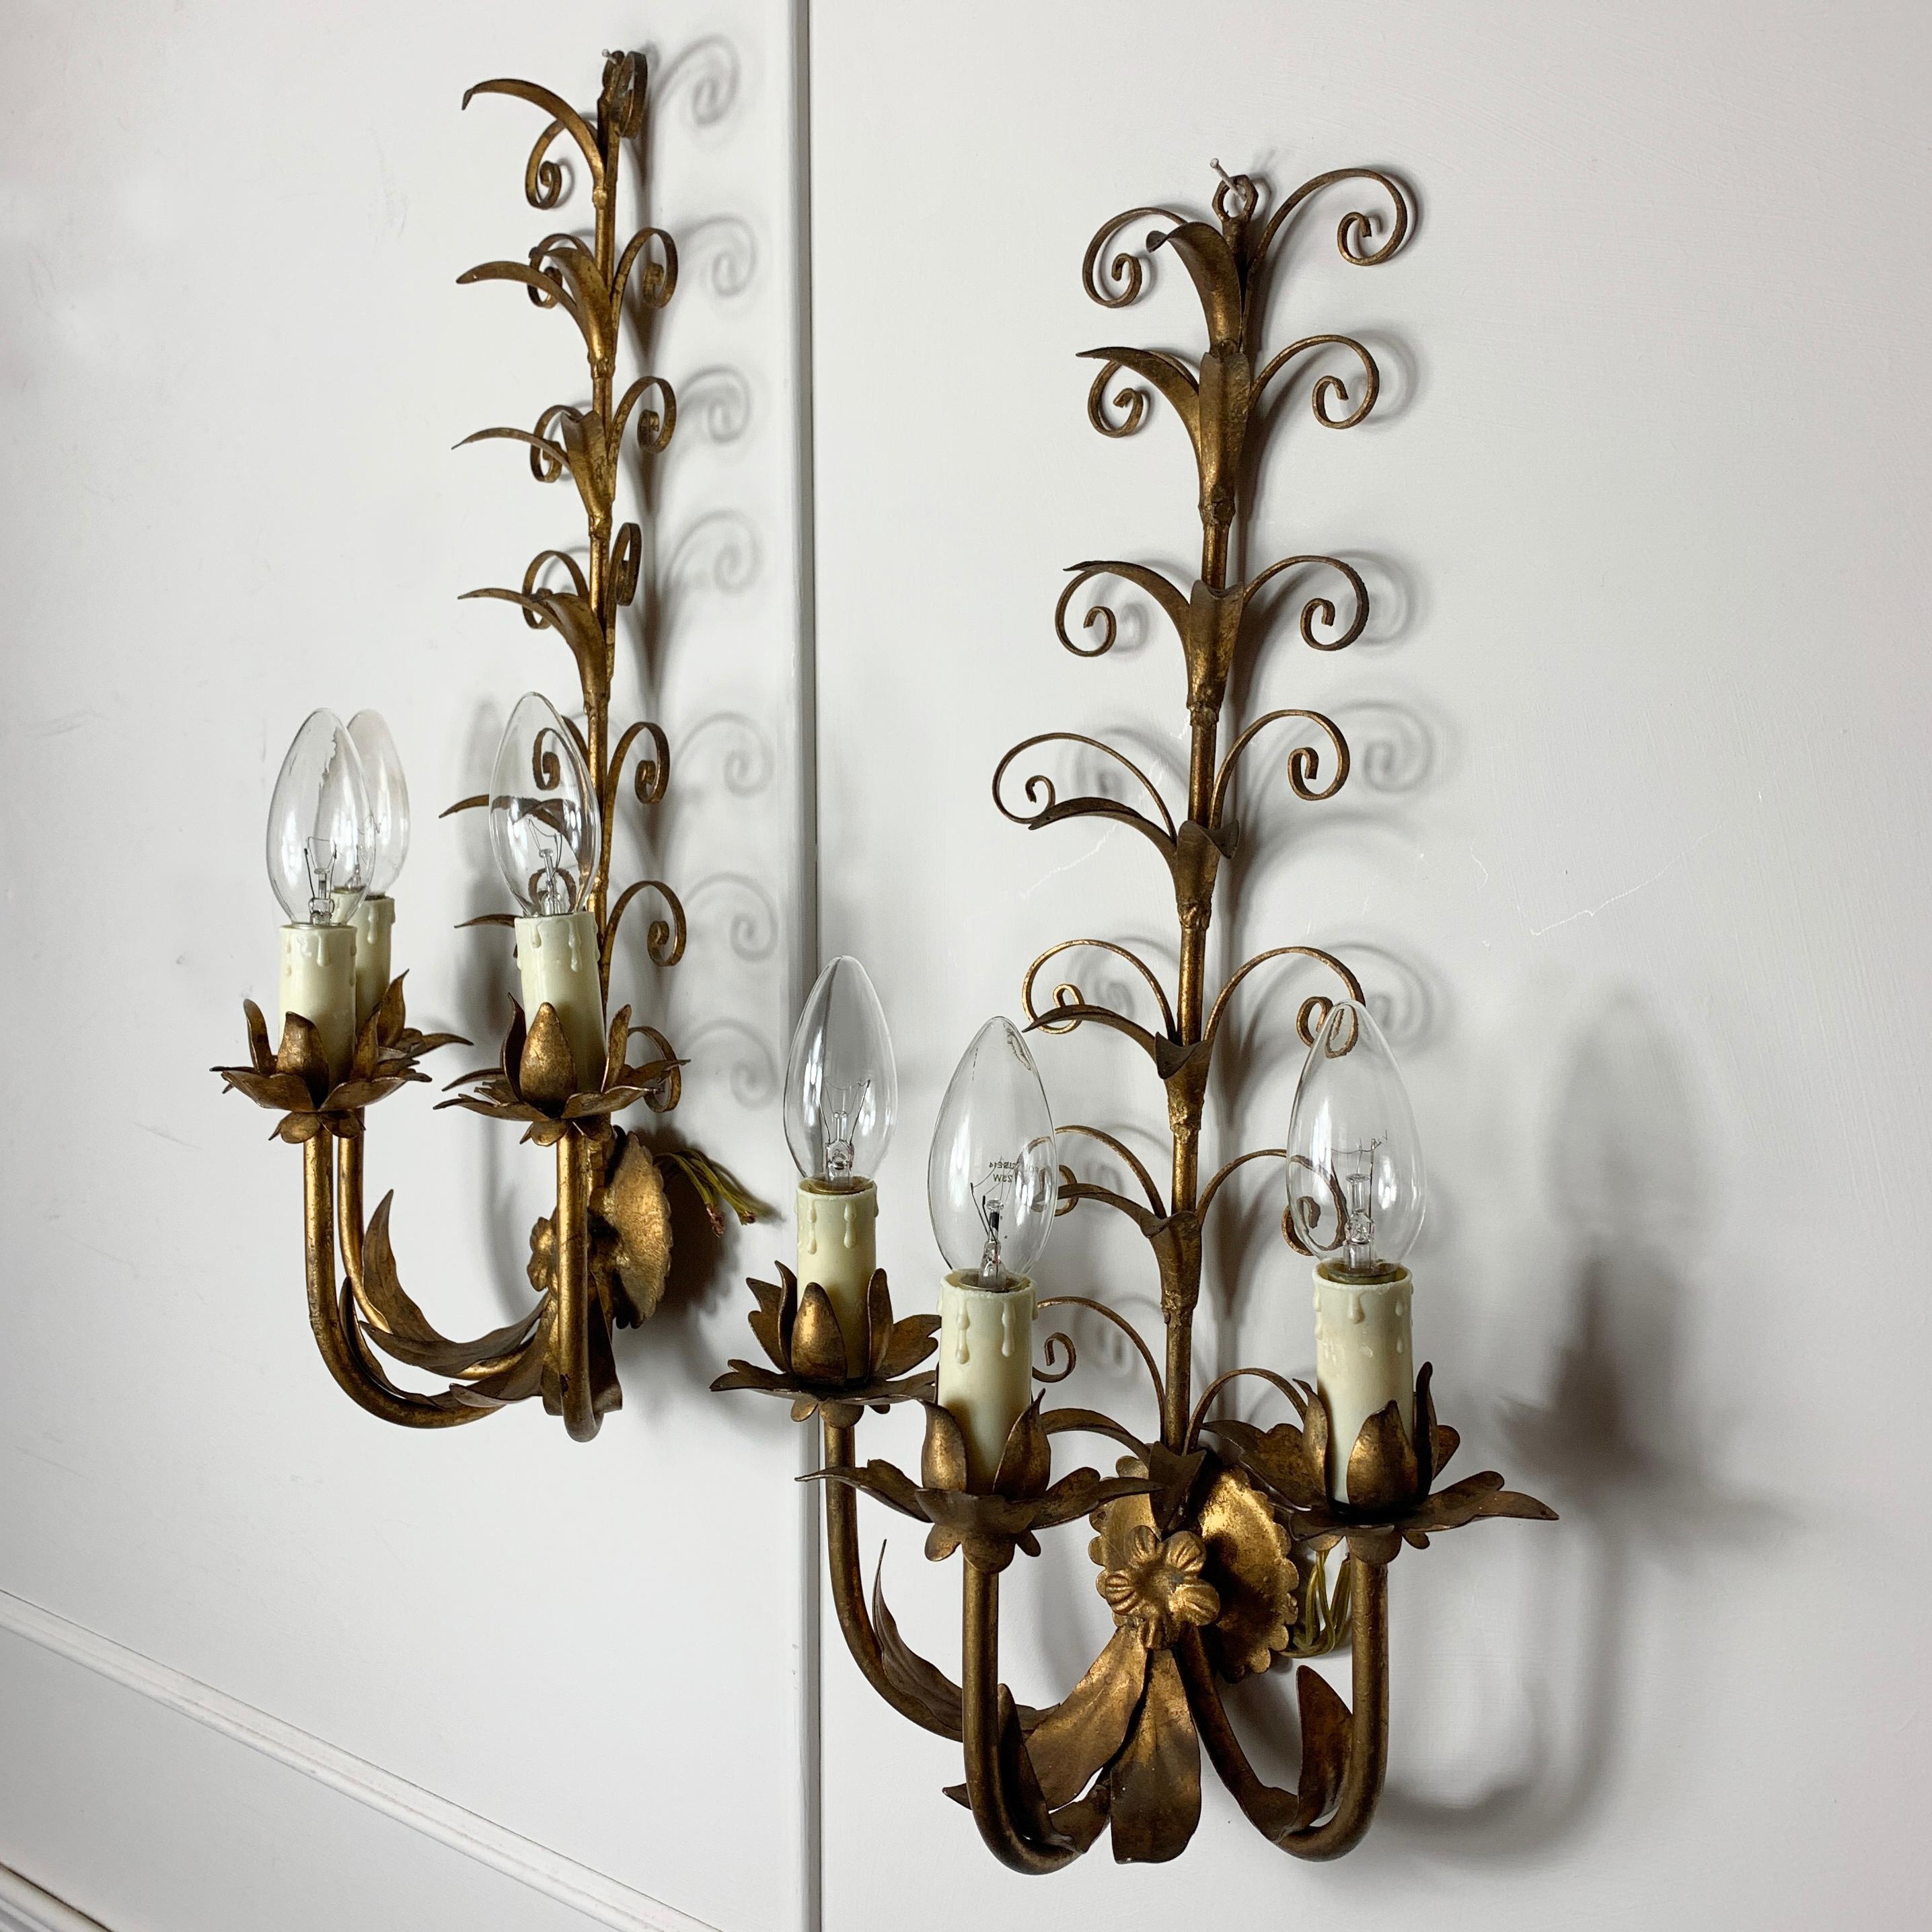 Gold French Scroll Leaf  Wall Lights, circa 1960s For Sale 1